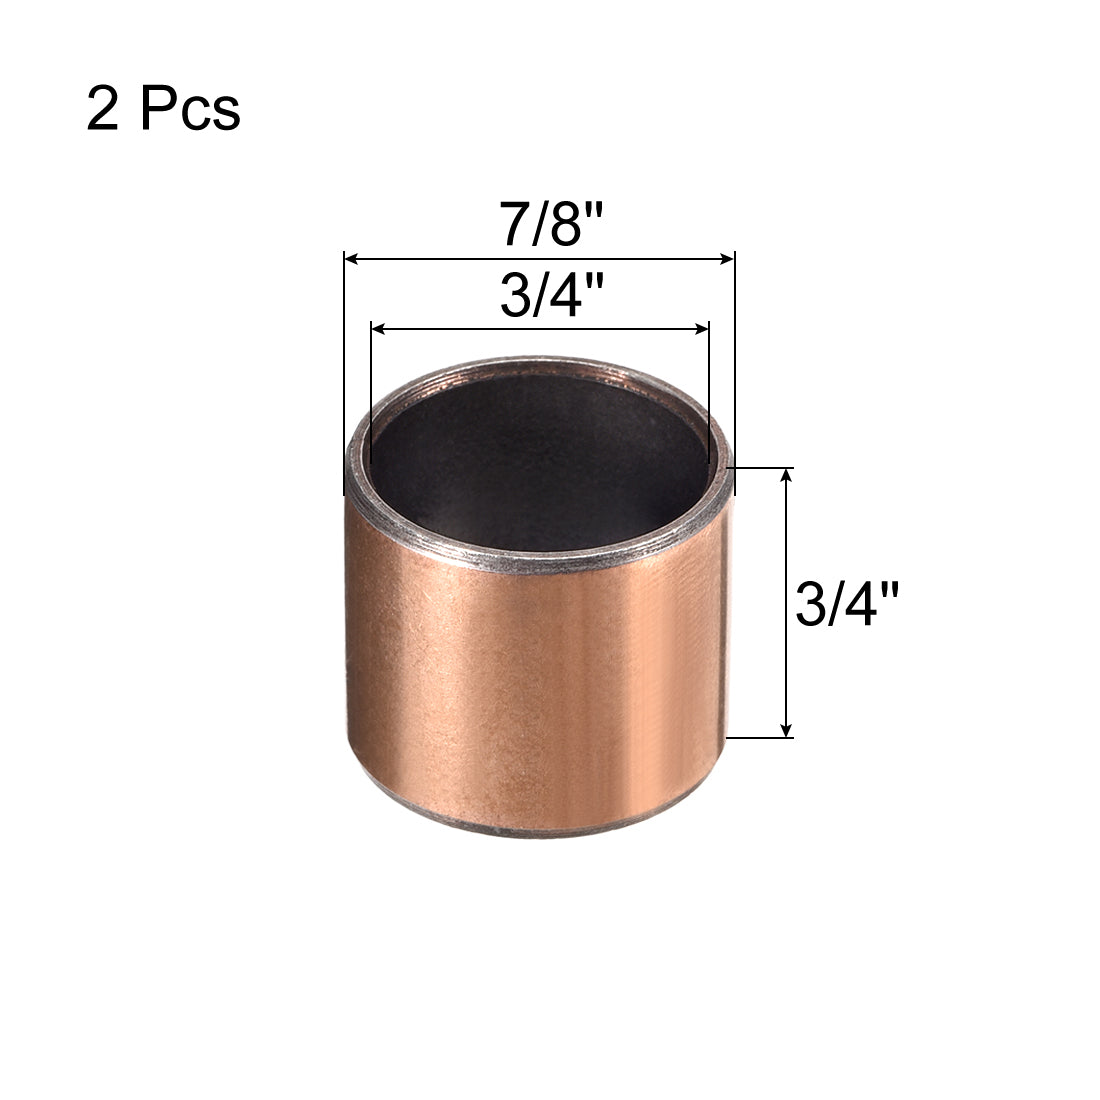 uxcell Uxcell Sleeve (Plain) Bearings 3/4" Bore 7/8" OD 3/4" L Wrapped Oilless Bushings 2pcs